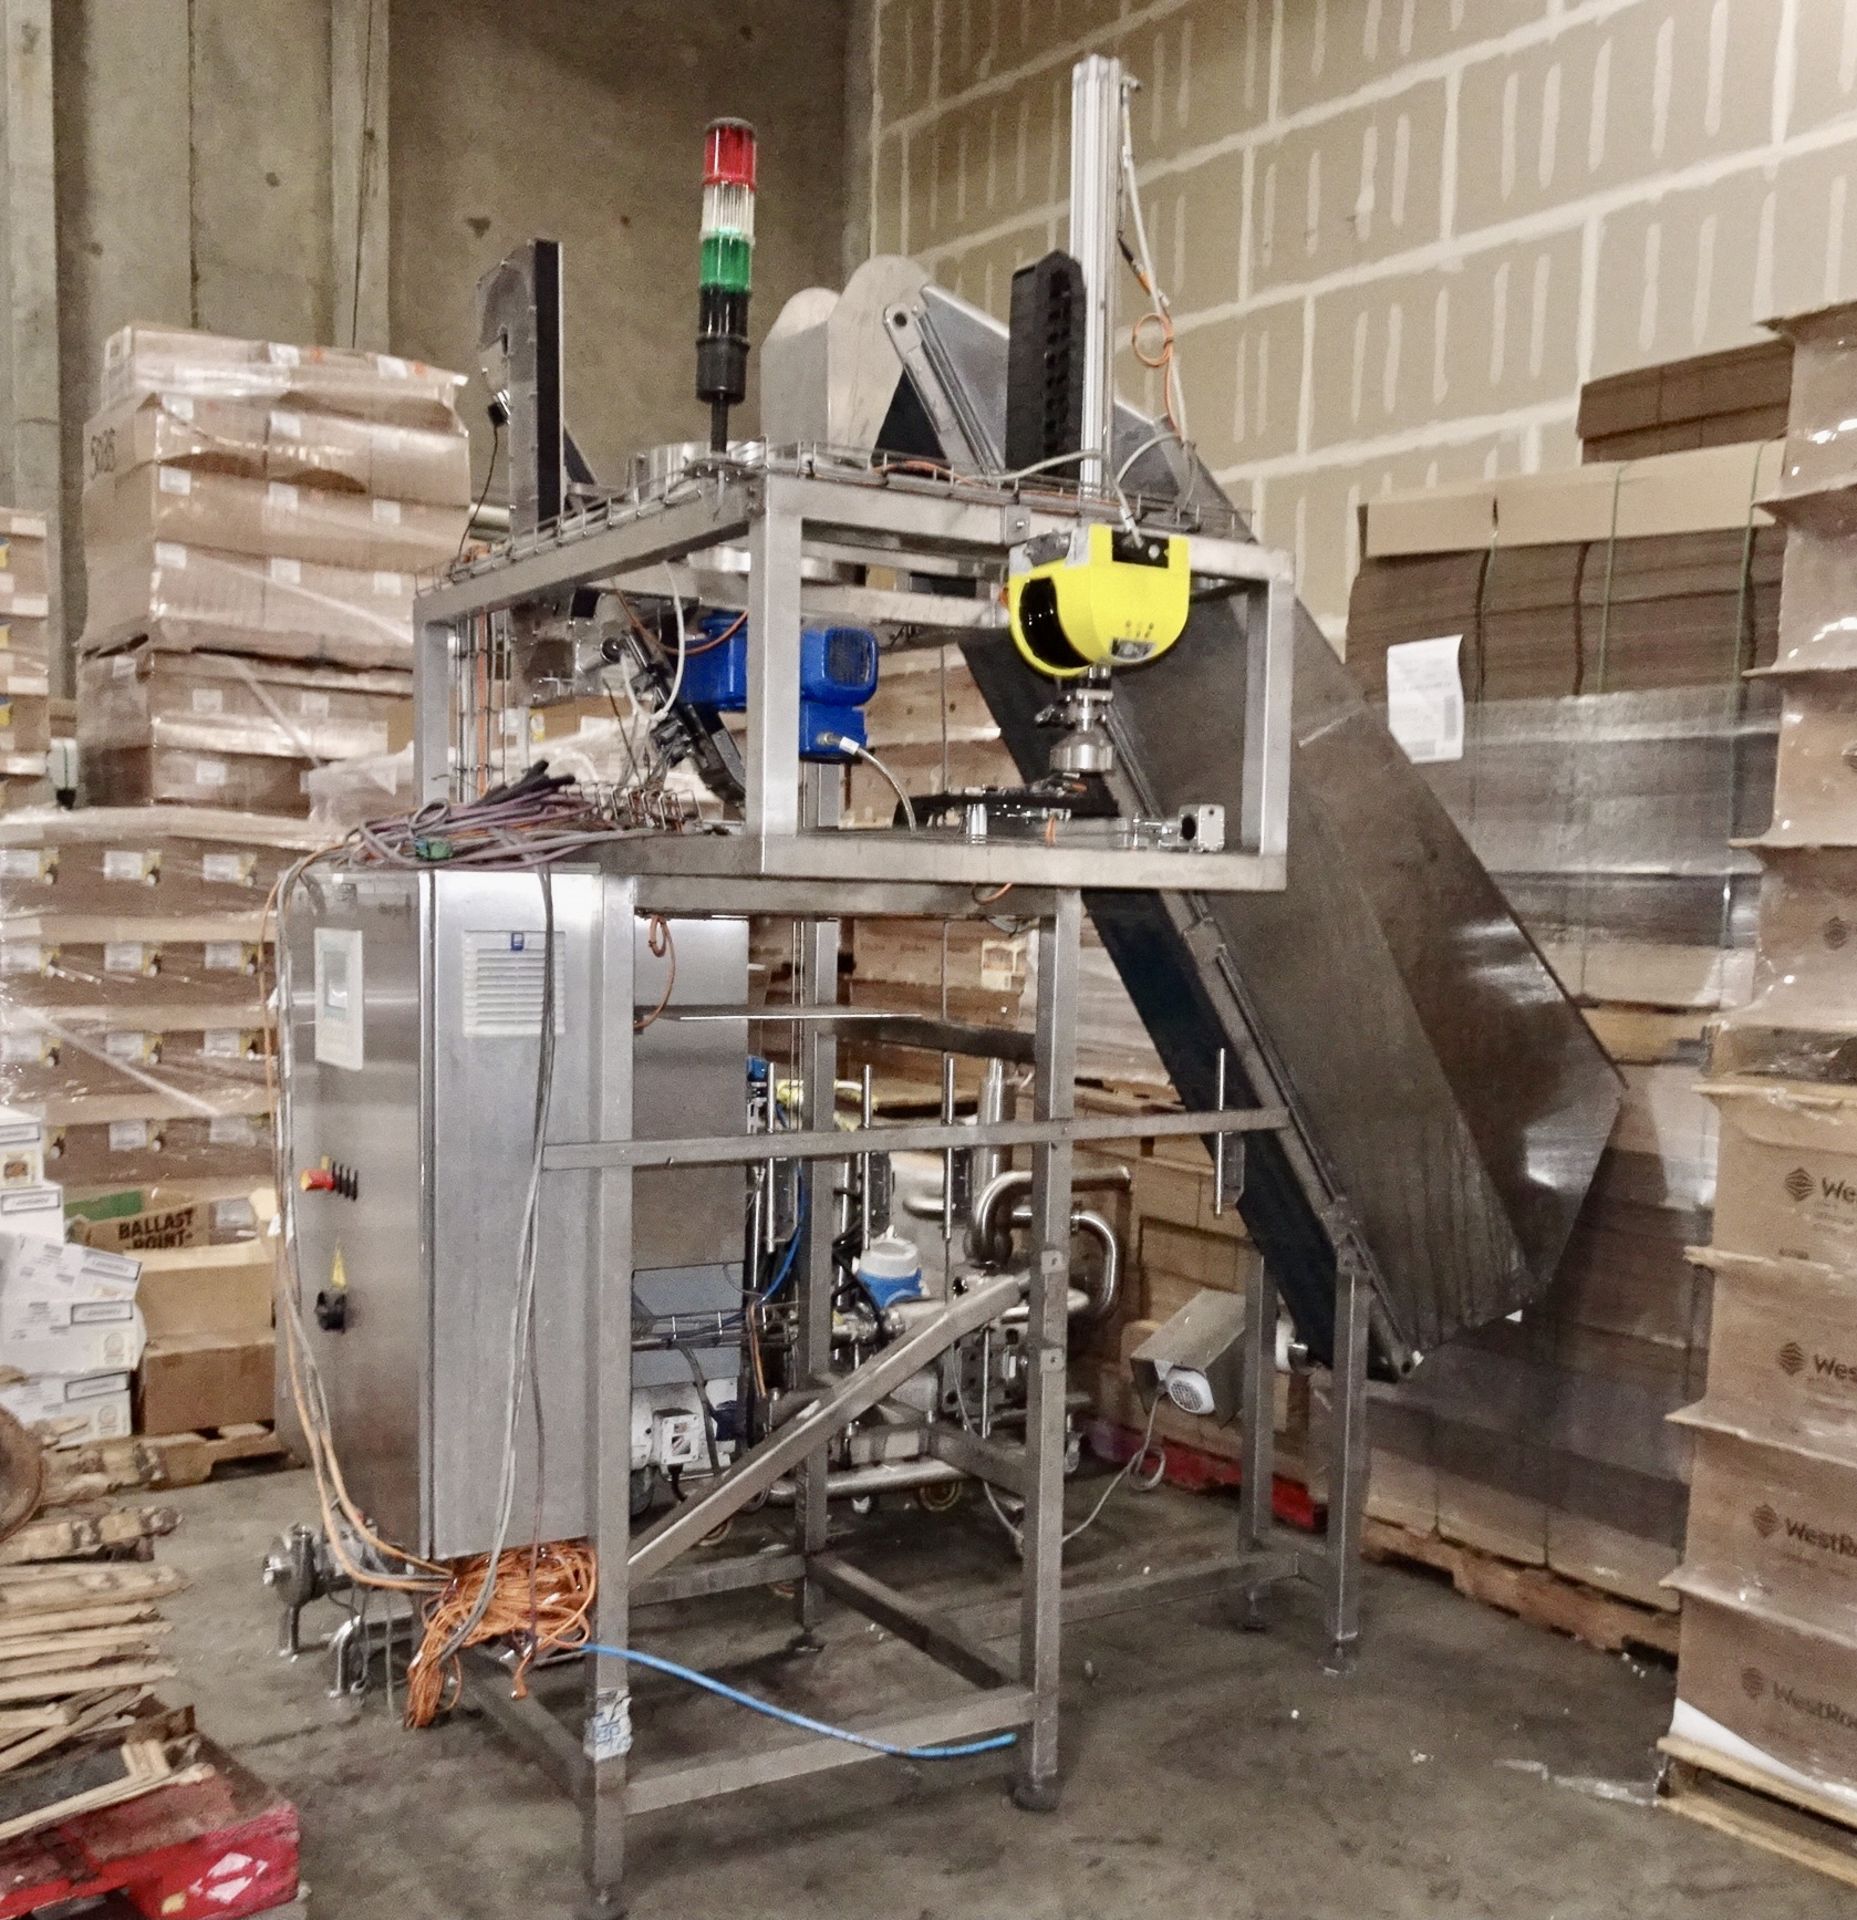 2013 Albert Frey Keg Capper, Elevator and Sorter, Self Contained, Siemens Simatic P - Contact Rigger